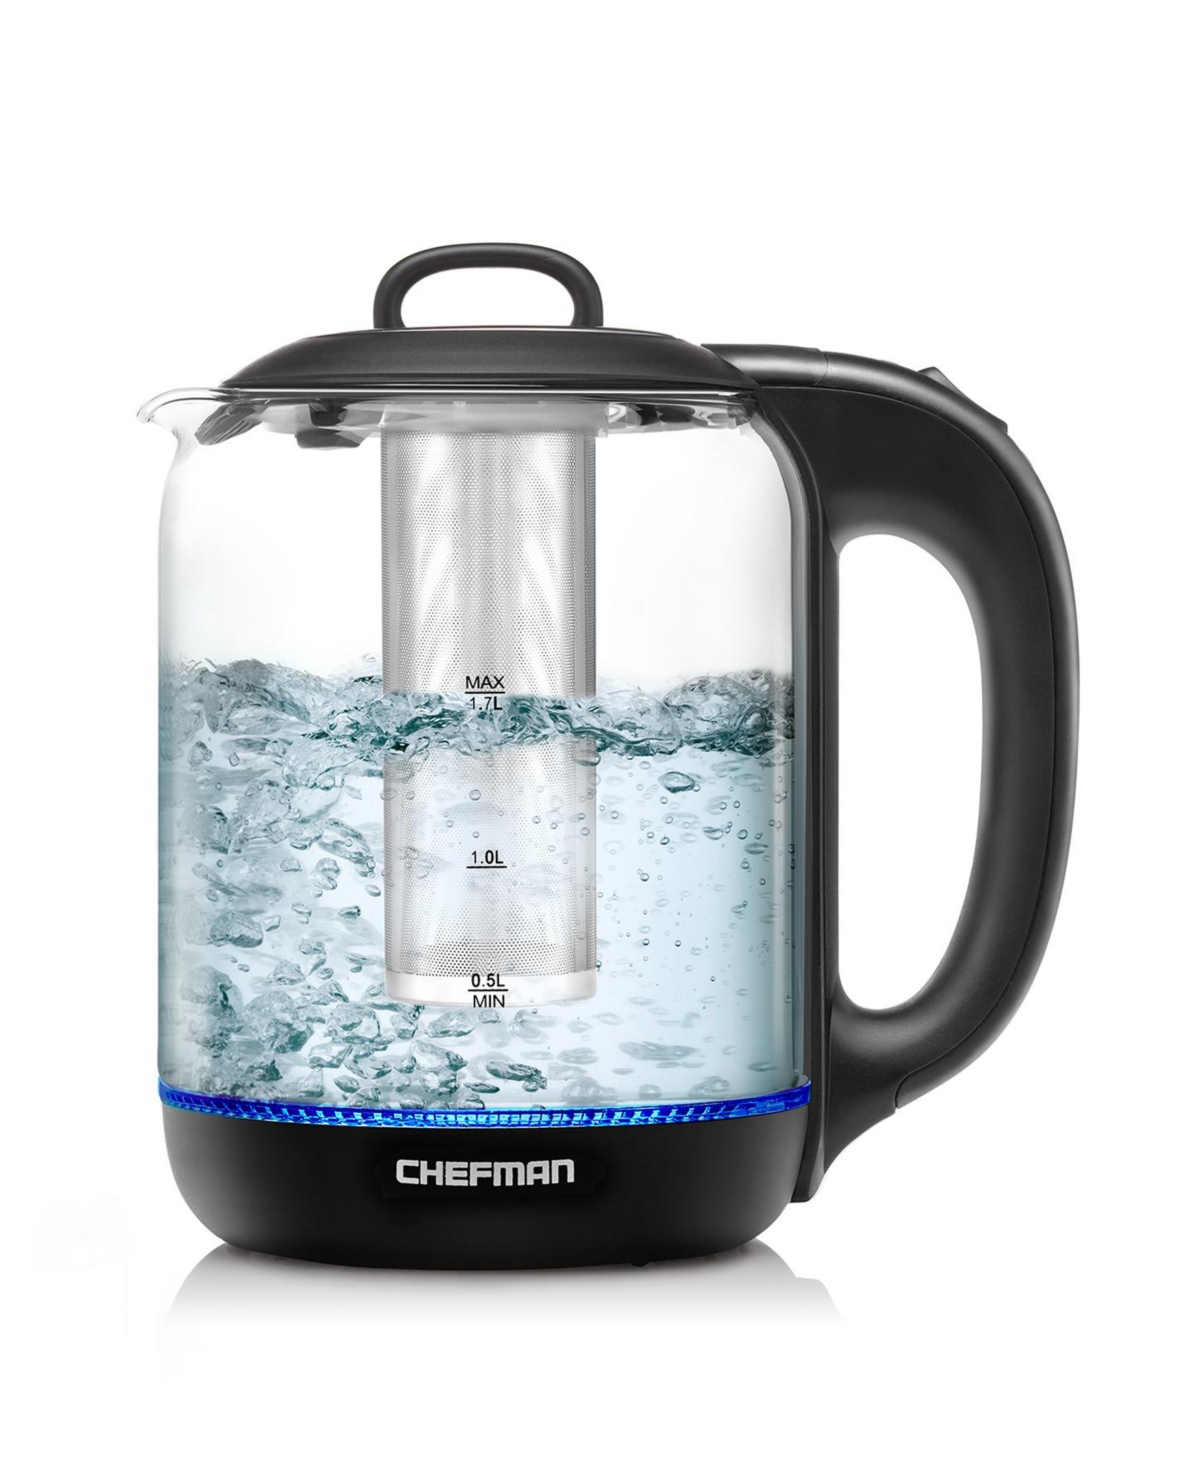 Chefman 1.7 Liter Electric Glass Kettle With Tea Infuser In Black